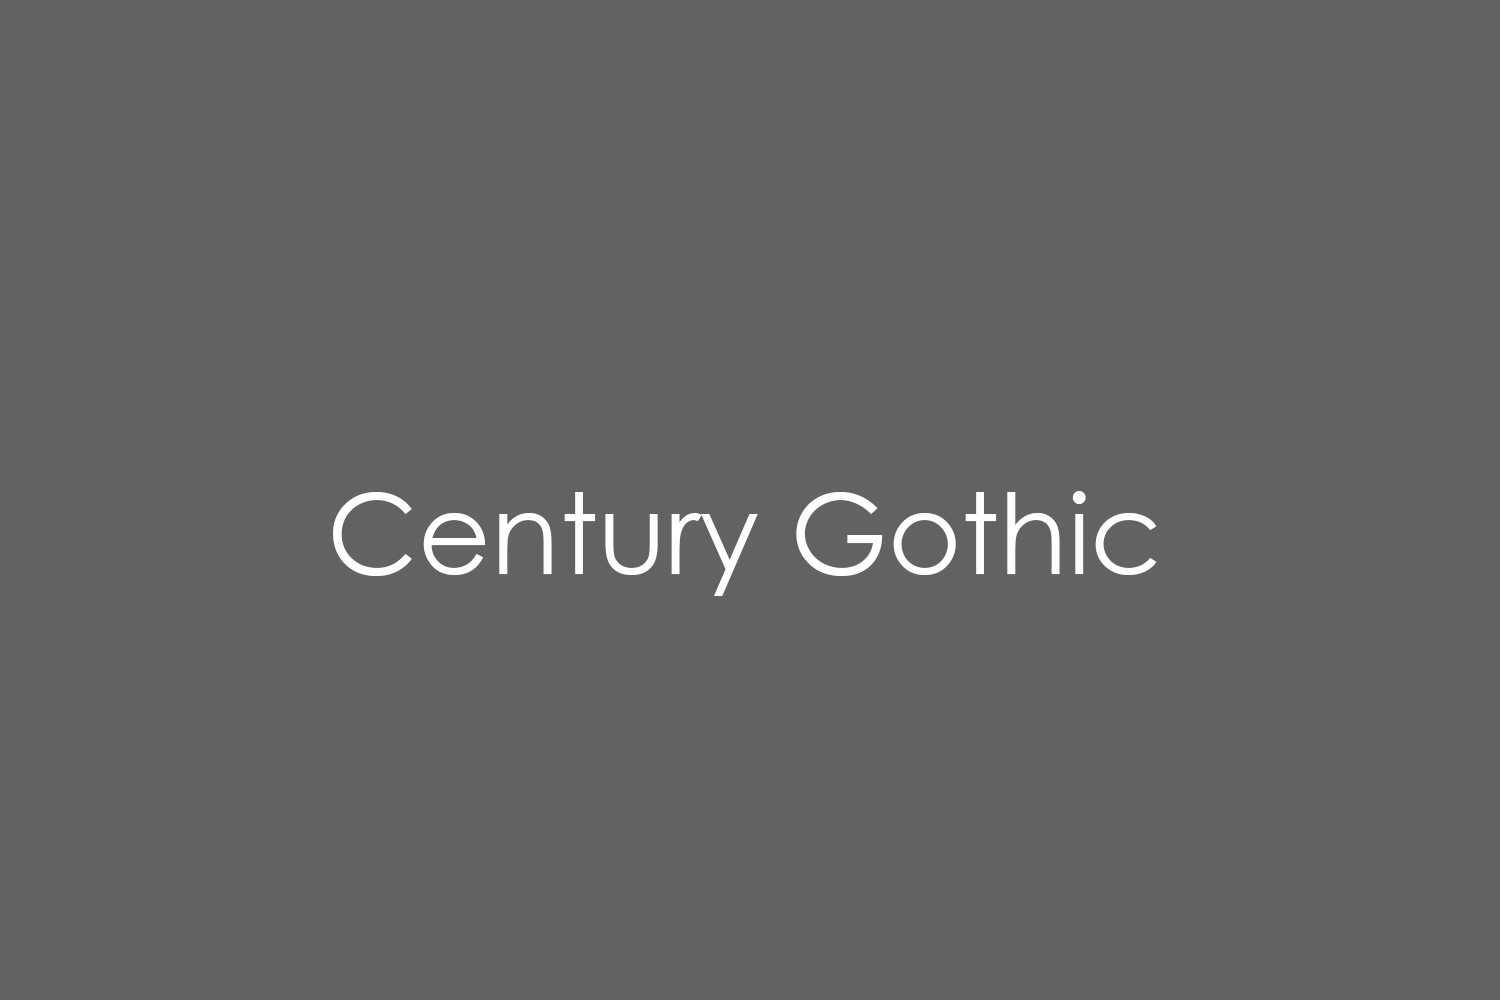 Century gothic font download dell computer skins